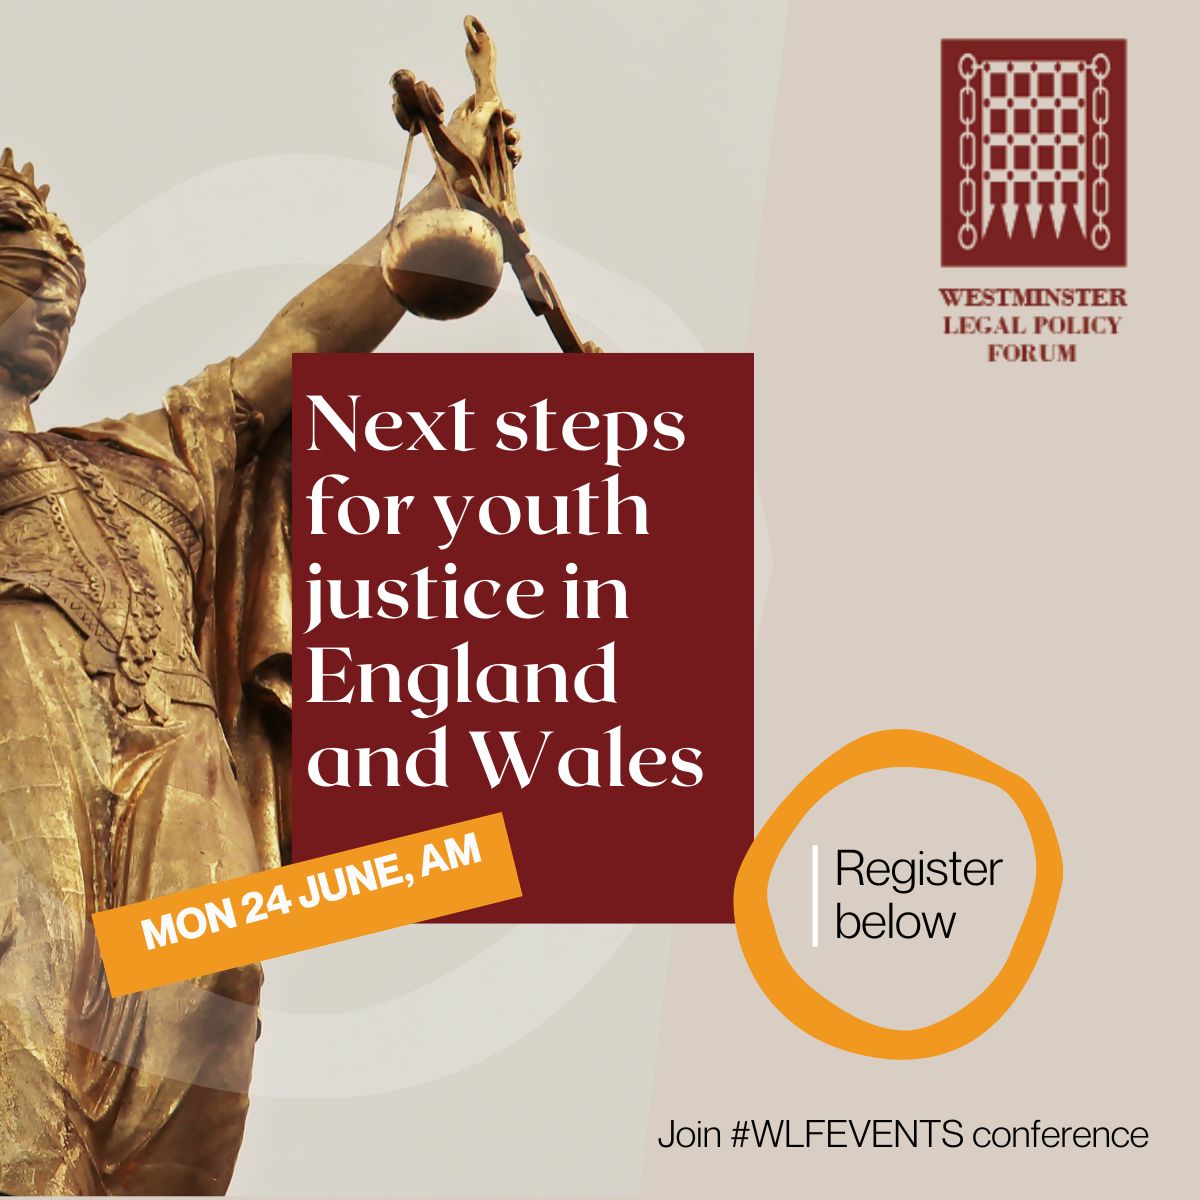 #WLPFEVENTS are holding a conference called Next steps for youth justice in England and Wales! Join on the 24th of June to be a part of this conversation with speakers including @_YJB @Oasis_UK @MoJGovUK and more! More information: westminsterforumprojects.co.uk/conference/You…